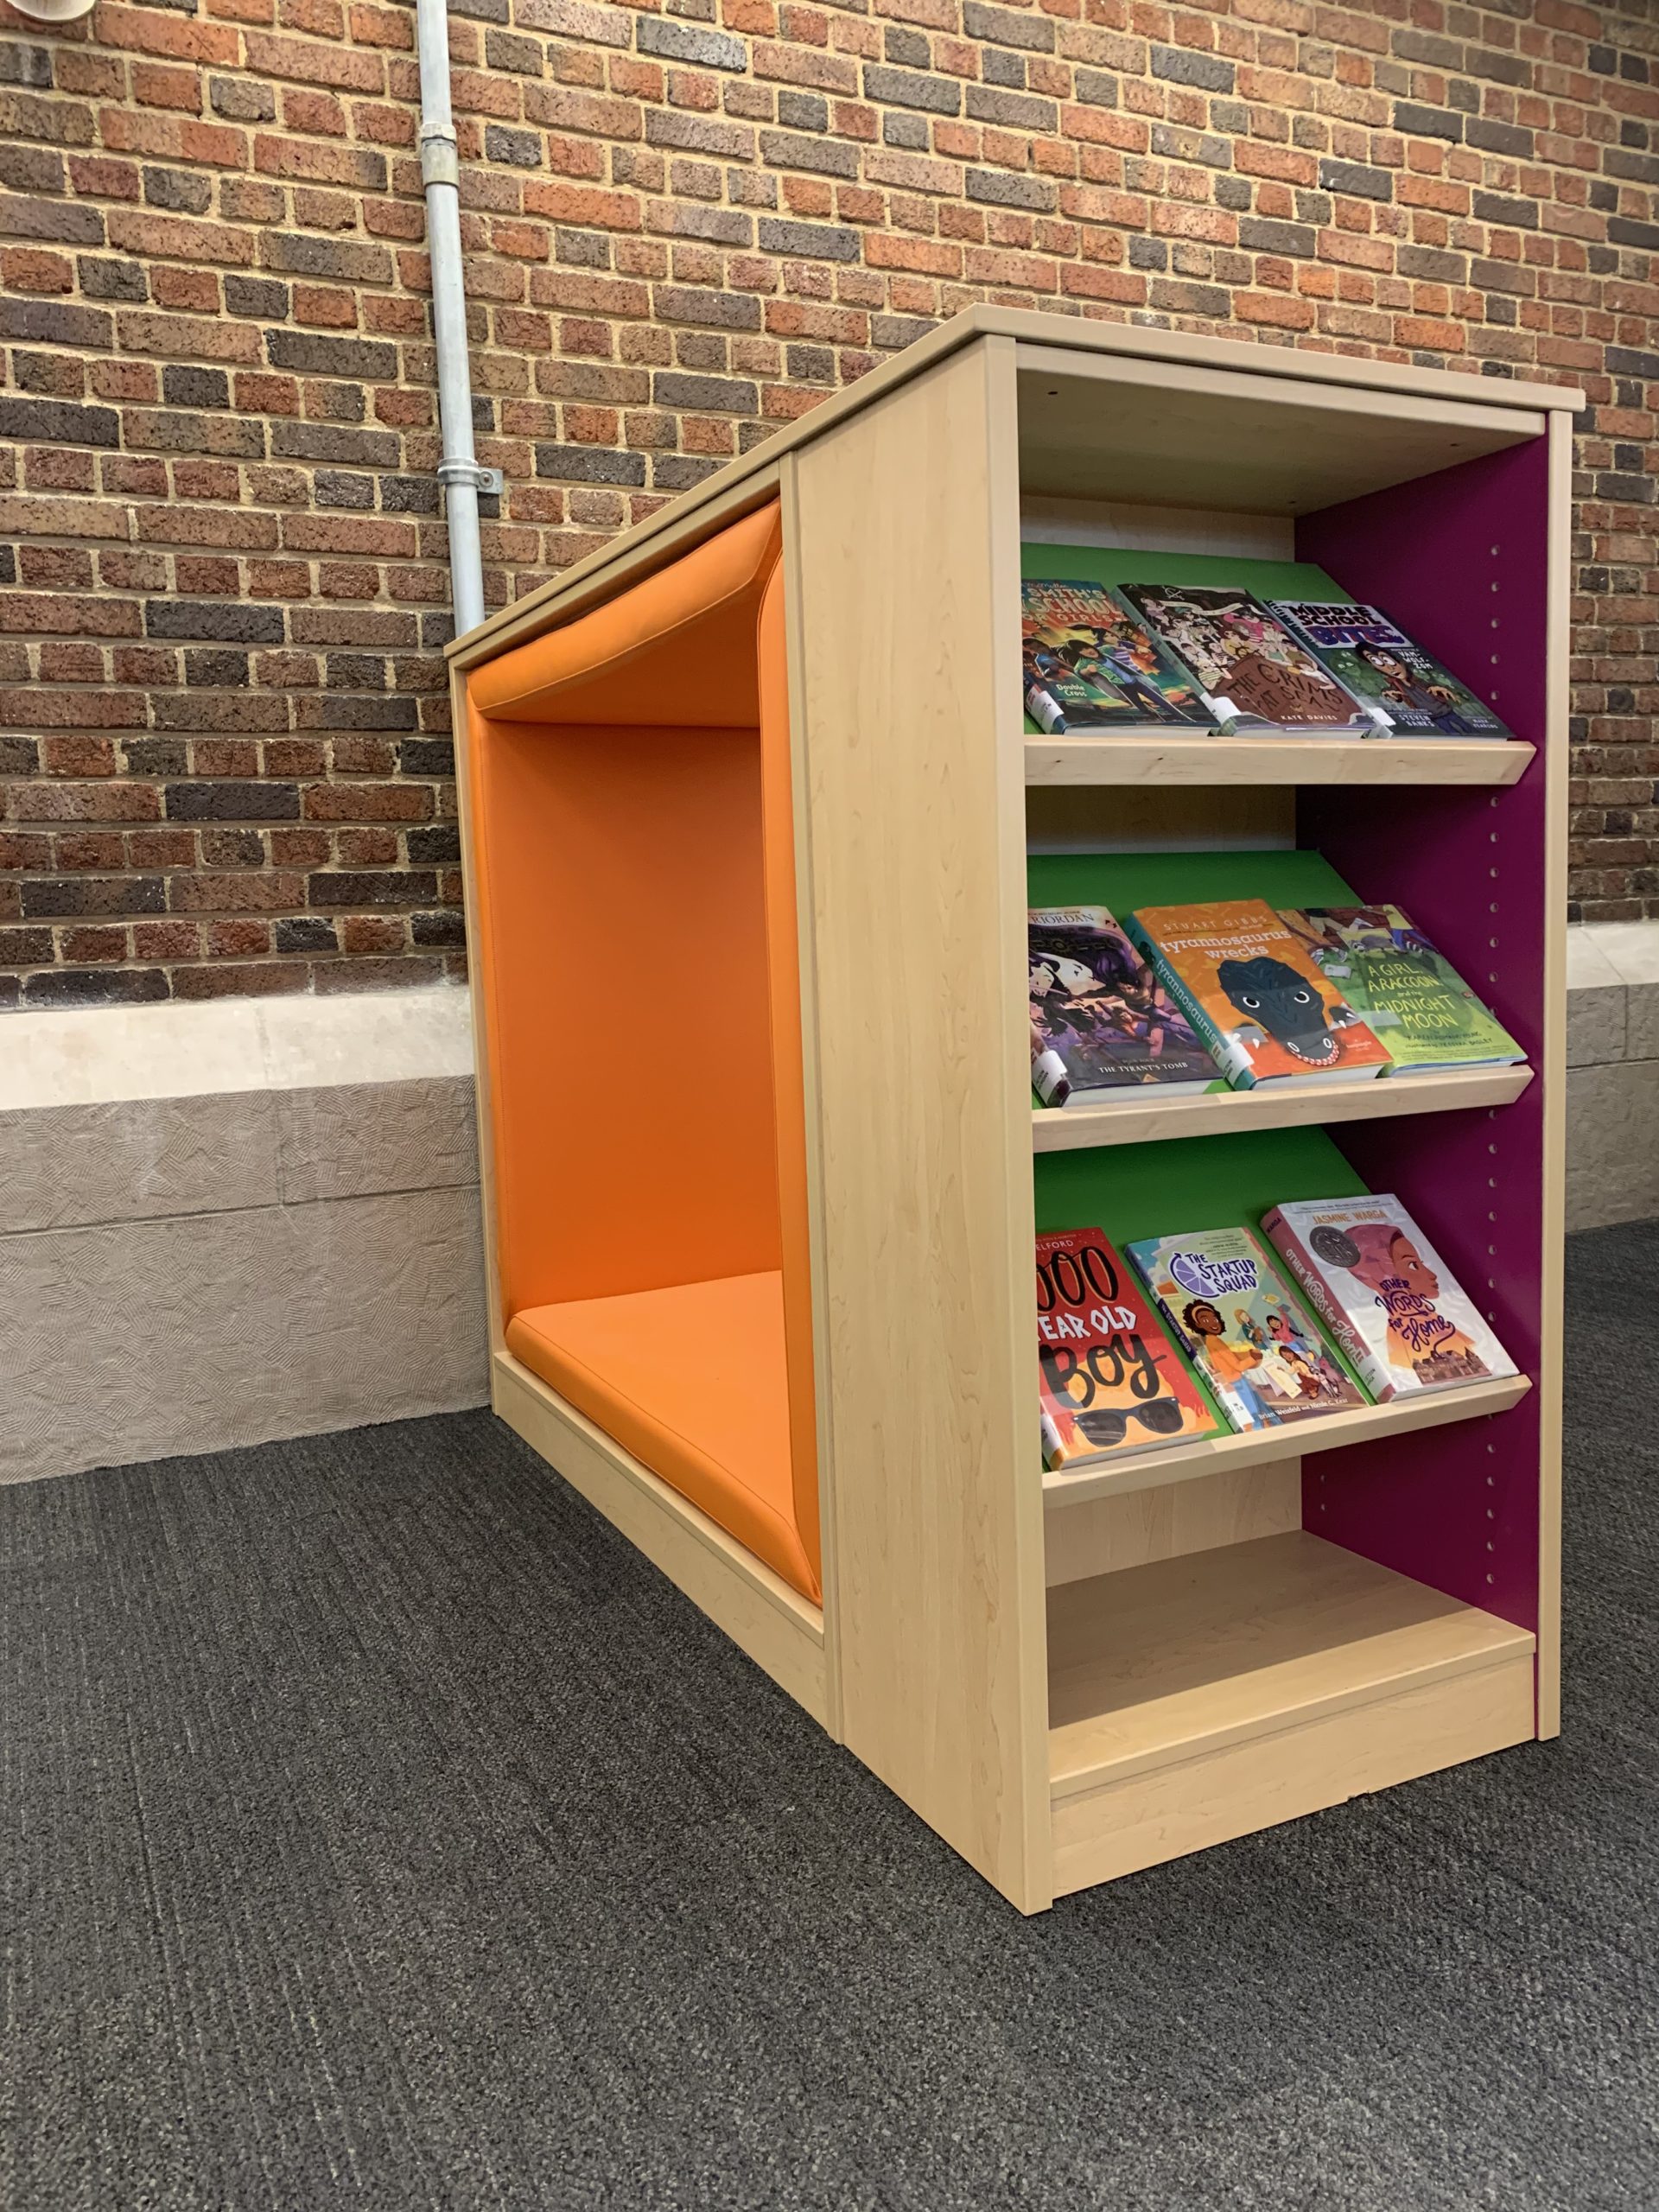 Several reading cubbies are scattered throughout the room.